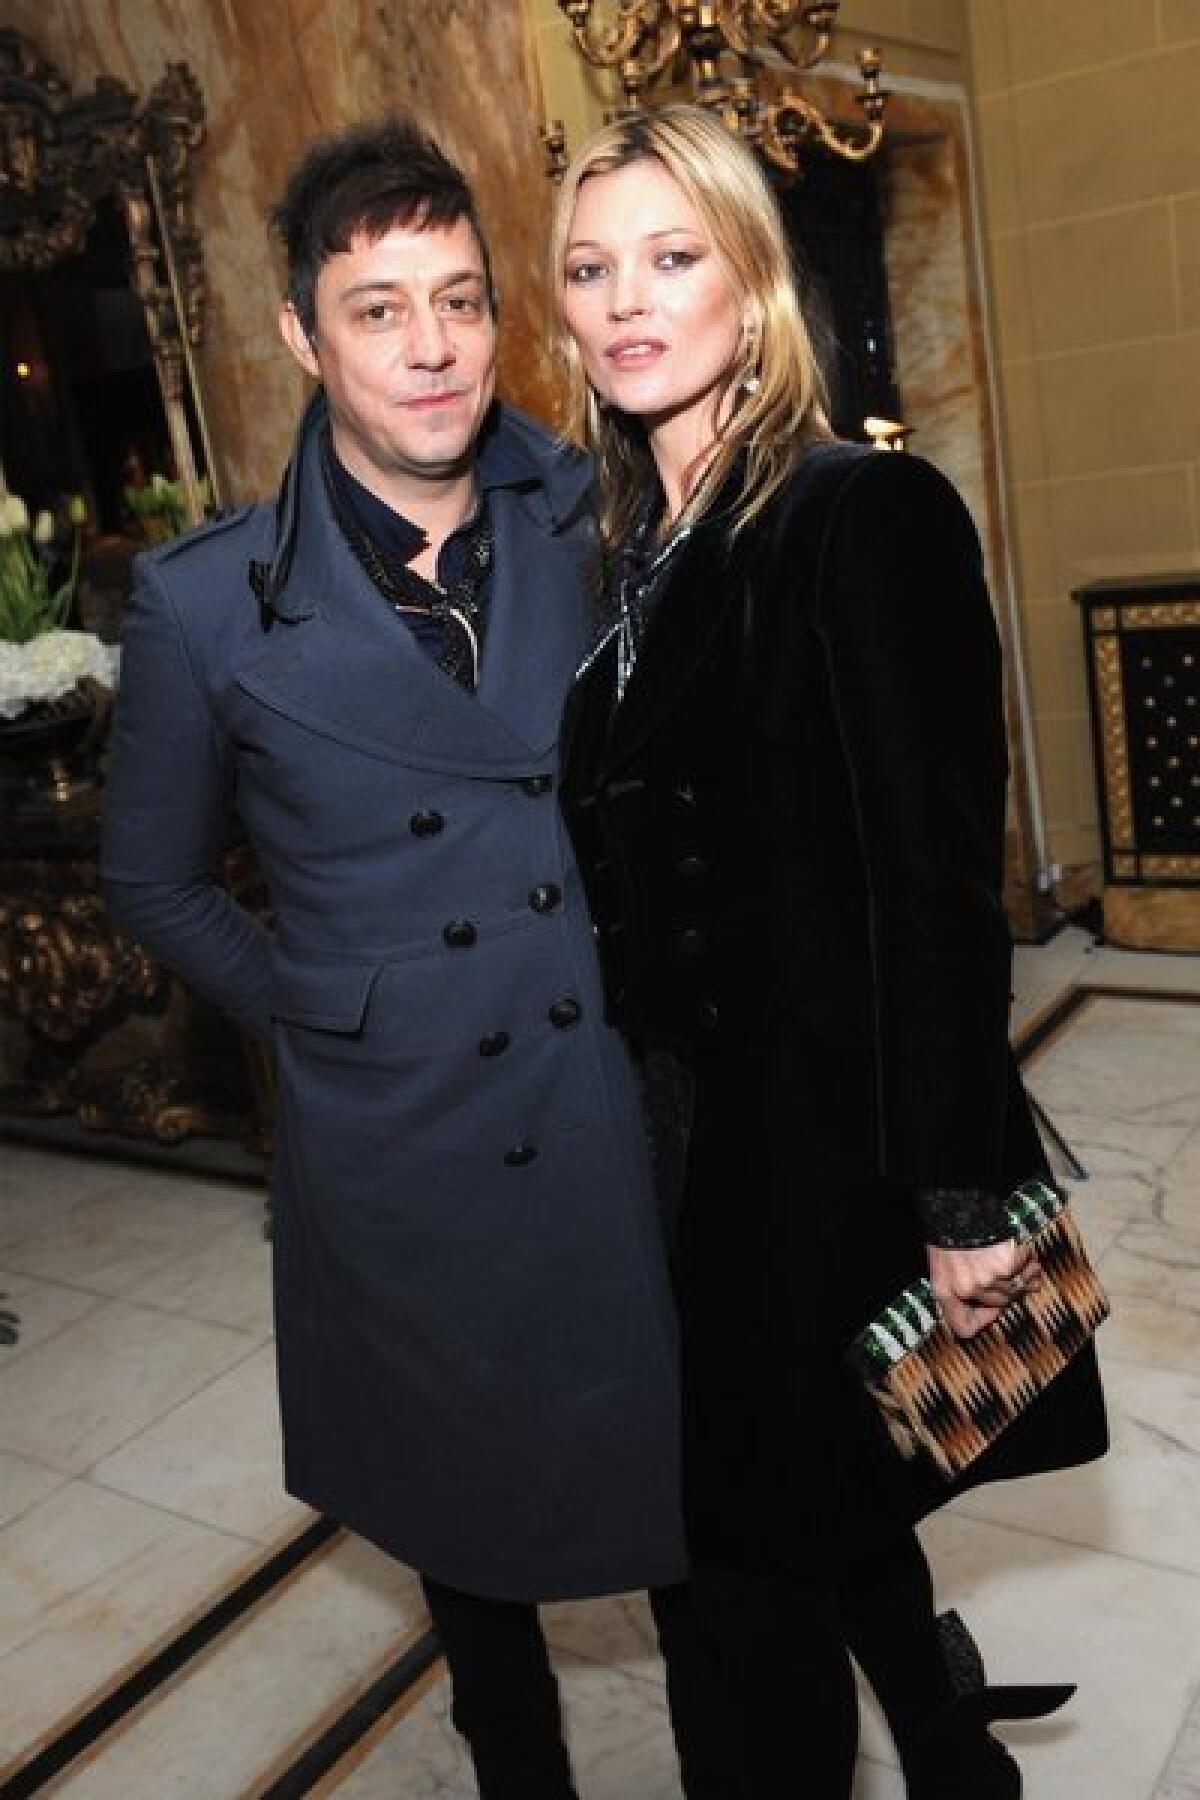 Jamie Hince and Kate Moss pose at miu-miu-london, a temporary women's club in London.